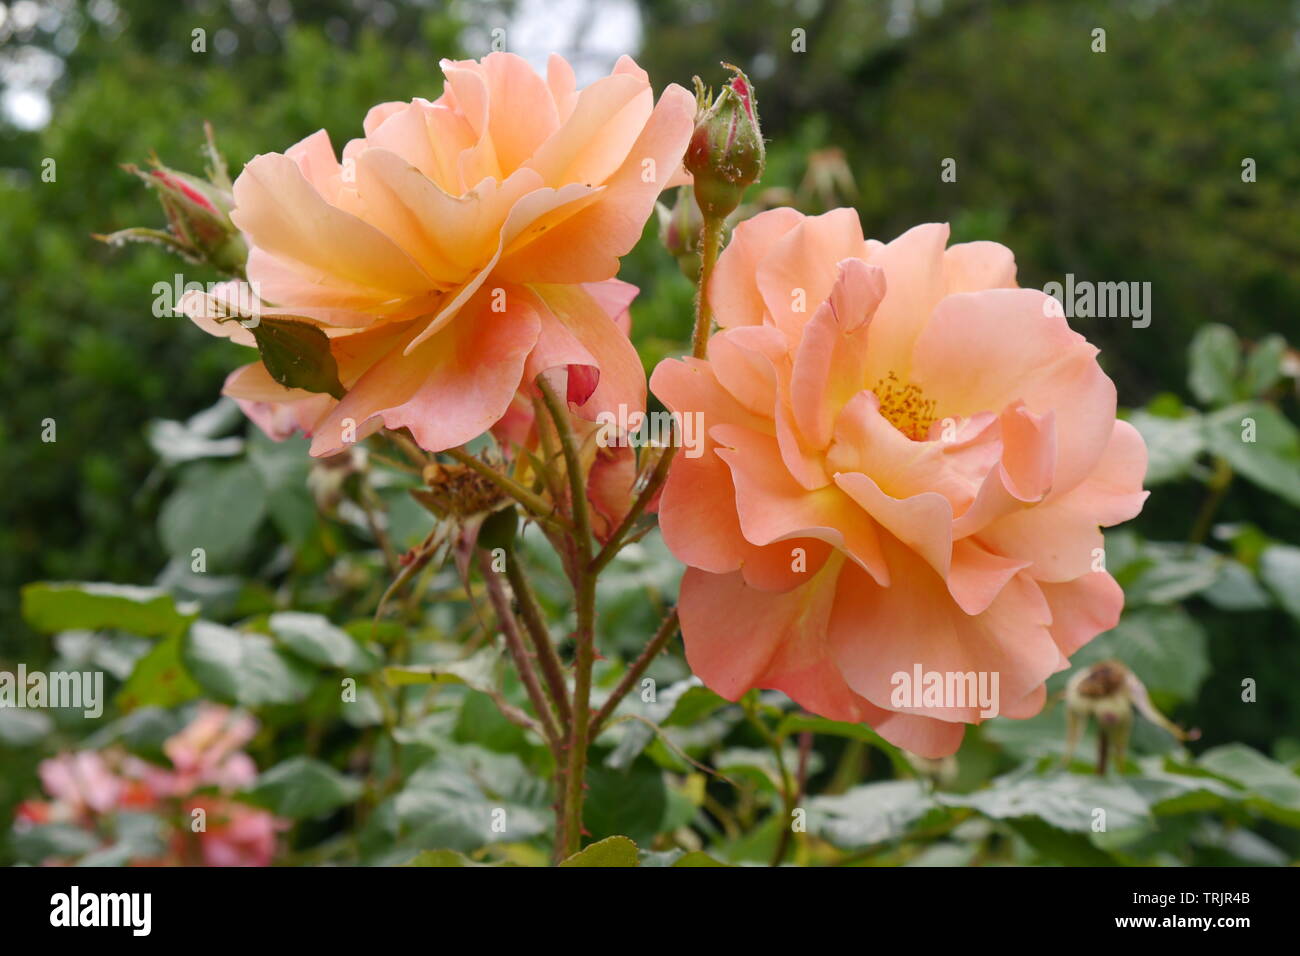 Beautiful orange and light pink rose flowers with green leaves in the  background Stock Photo - Alamy